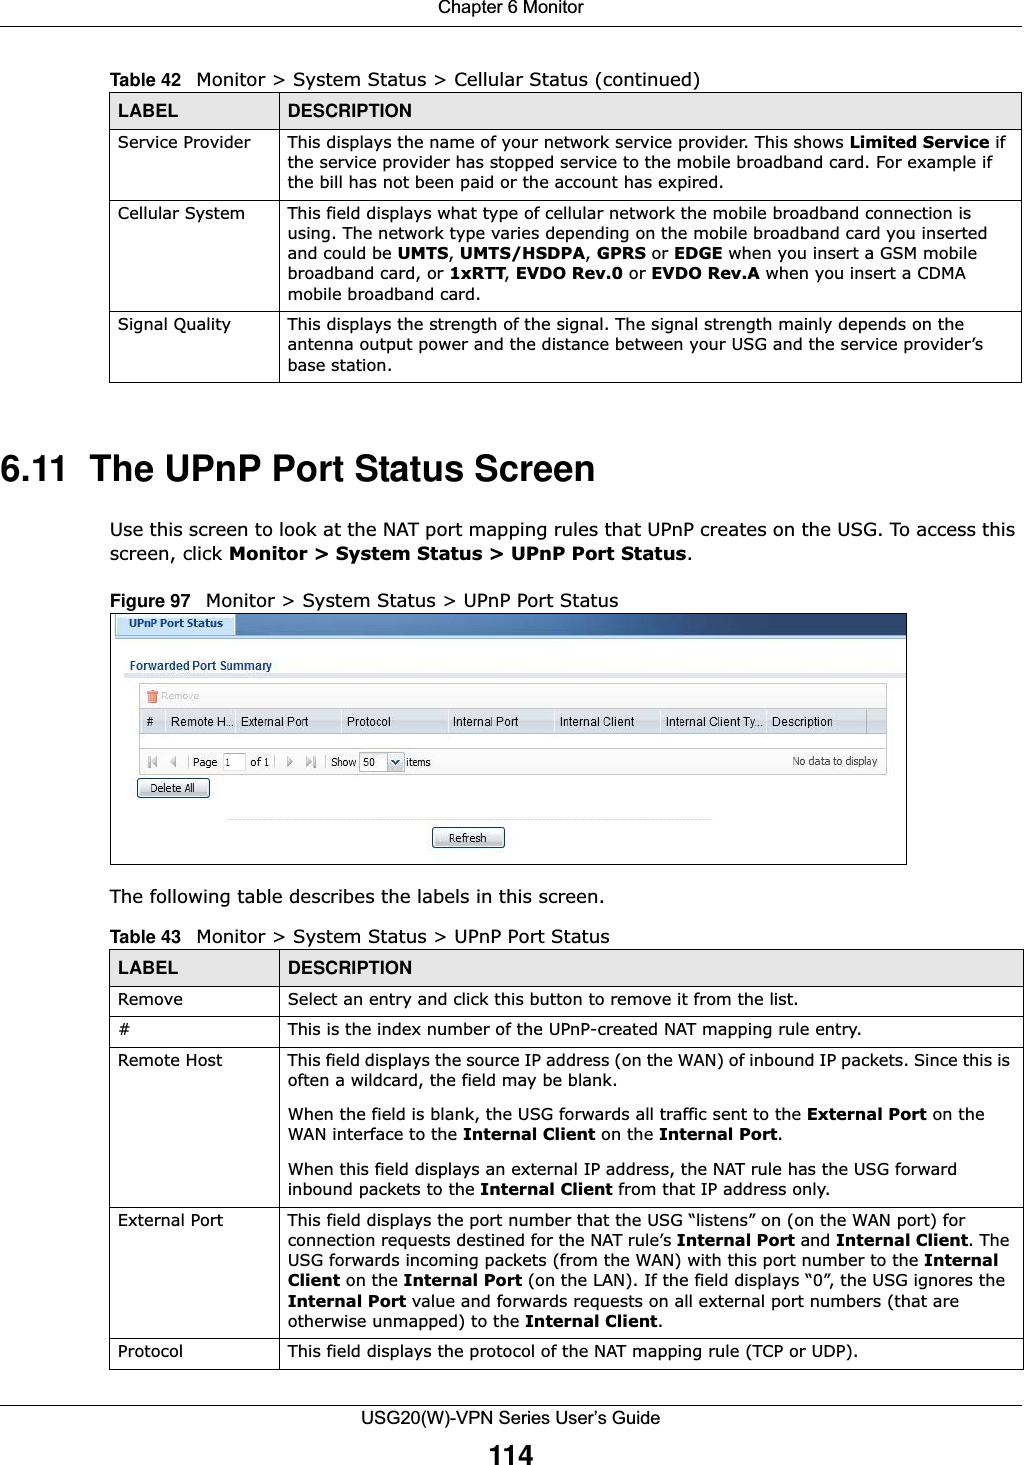 Chapter 6 MonitorUSG20(W)-VPN Series User’s Guide1146.11  The UPnP Port Status Screen Use this screen to look at the NAT port mapping rules that UPnP creates on the USG. To access this screen, click Monitor &gt; System Status &gt; UPnP Port Status.Figure 97   Monitor &gt; System Status &gt; UPnP Port StatusThe following table describes the labels in this screen. Service Provider This displays the name of your network service provider. This shows Limited Service if the service provider has stopped service to the mobile broadband card. For example if the bill has not been paid or the account has expired. Cellular System This field displays what type of cellular network the mobile broadband connection is using. The network type varies depending on the mobile broadband card you inserted and could be UMTS, UMTS/HSDPA, GPRS or EDGE when you insert a GSM mobile broadband card, or 1xRTT, EVDO Rev.0 or EVDO Rev.A when you insert a CDMA mobile broadband card.Signal Quality This displays the strength of the signal. The signal strength mainly depends on the antenna output power and the distance between your USG and the service provider’s base station. Table 42   Monitor &gt; System Status &gt; Cellular Status (continued)LABEL DESCRIPTIONTable 43   Monitor &gt; System Status &gt; UPnP Port StatusLABEL DESCRIPTIONRemove Select an entry and click this button to remove it from the list.# This is the index number of the UPnP-created NAT mapping rule entry.Remote Host This field displays the source IP address (on the WAN) of inbound IP packets. Since this is often a wildcard, the field may be blank.When the field is blank, the USG forwards all traffic sent to the External Port on the WAN interface to the Internal Client on the Internal Port. When this field displays an external IP address, the NAT rule has the USG forward inbound packets to the Internal Client from that IP address only. External Port This field displays the port number that the USG “listens” on (on the WAN port) for connection requests destined for the NAT rule’s Internal Port and Internal Client. The USG forwards incoming packets (from the WAN) with this port number to the Internal Client on the Internal Port (on the LAN). If the field displays “0”, the USG ignores the Internal Port value and forwards requests on all external port numbers (that are otherwise unmapped) to the Internal Client.Protocol This field displays the protocol of the NAT mapping rule (TCP or UDP). 